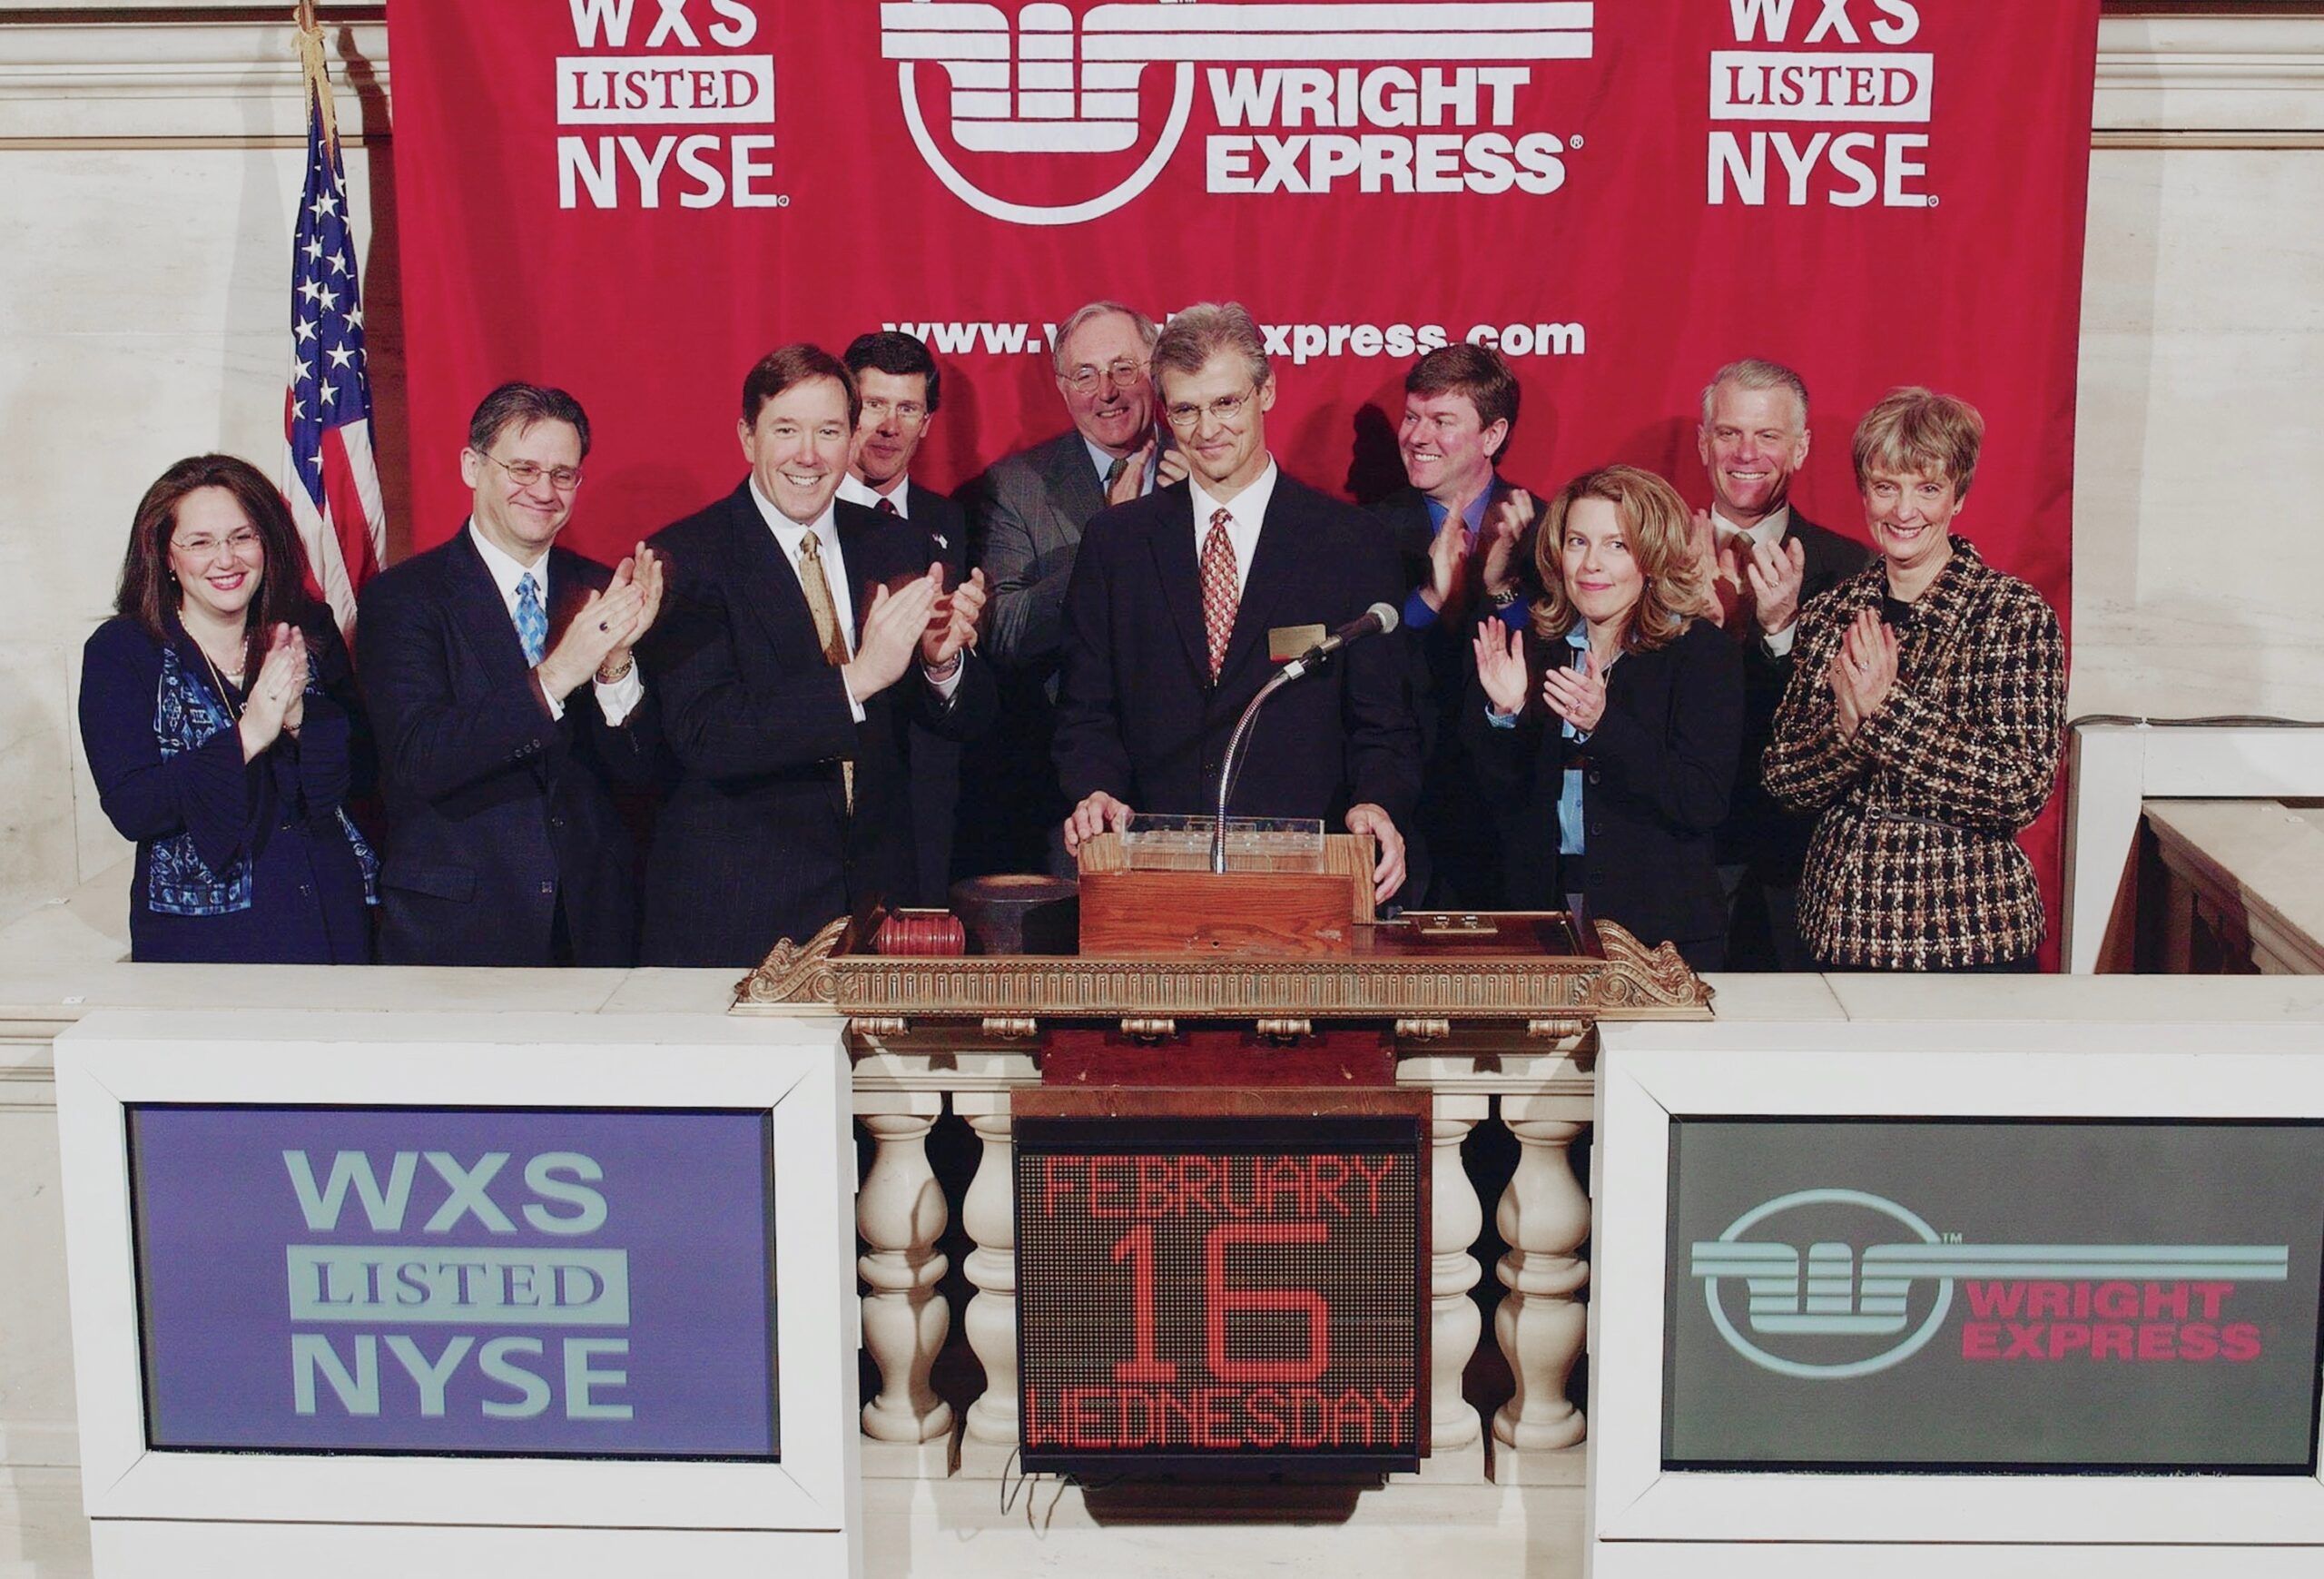 WEX executives at the NYSE on February 16, 2005, celebrating our IPO